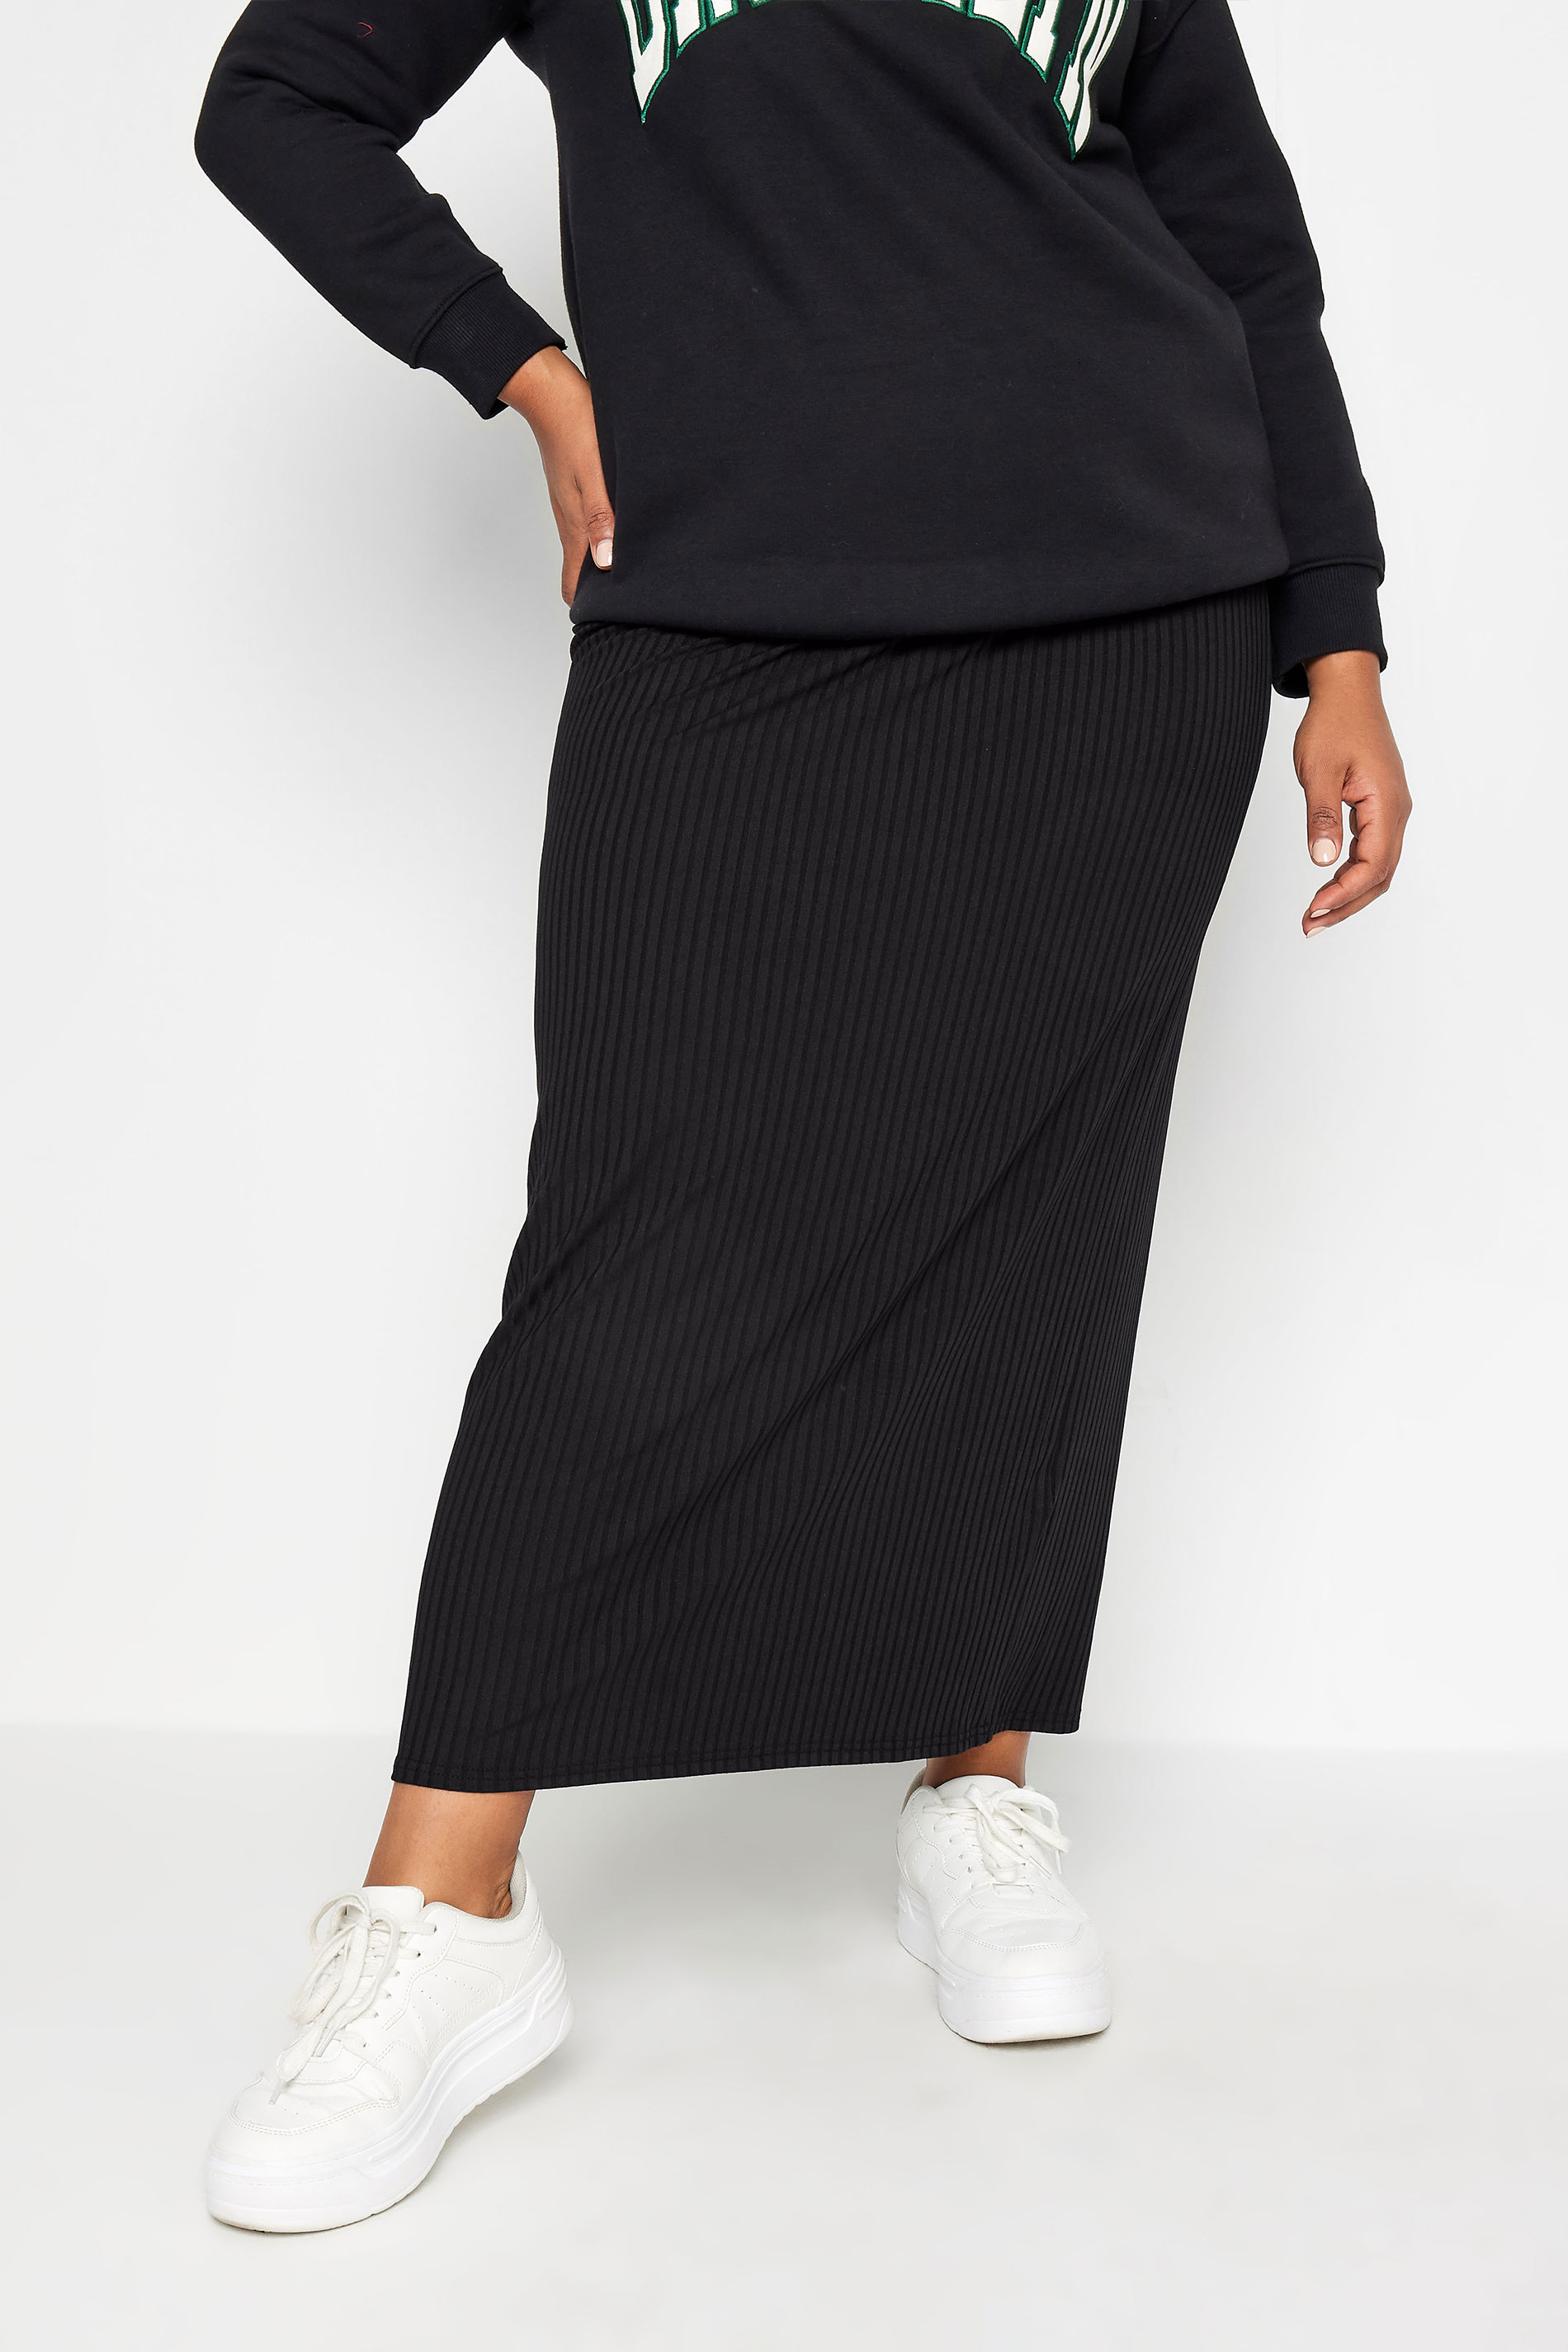 YOURS Plus Size Black Ribbed Maxi Skirt | Yours Clothing 1